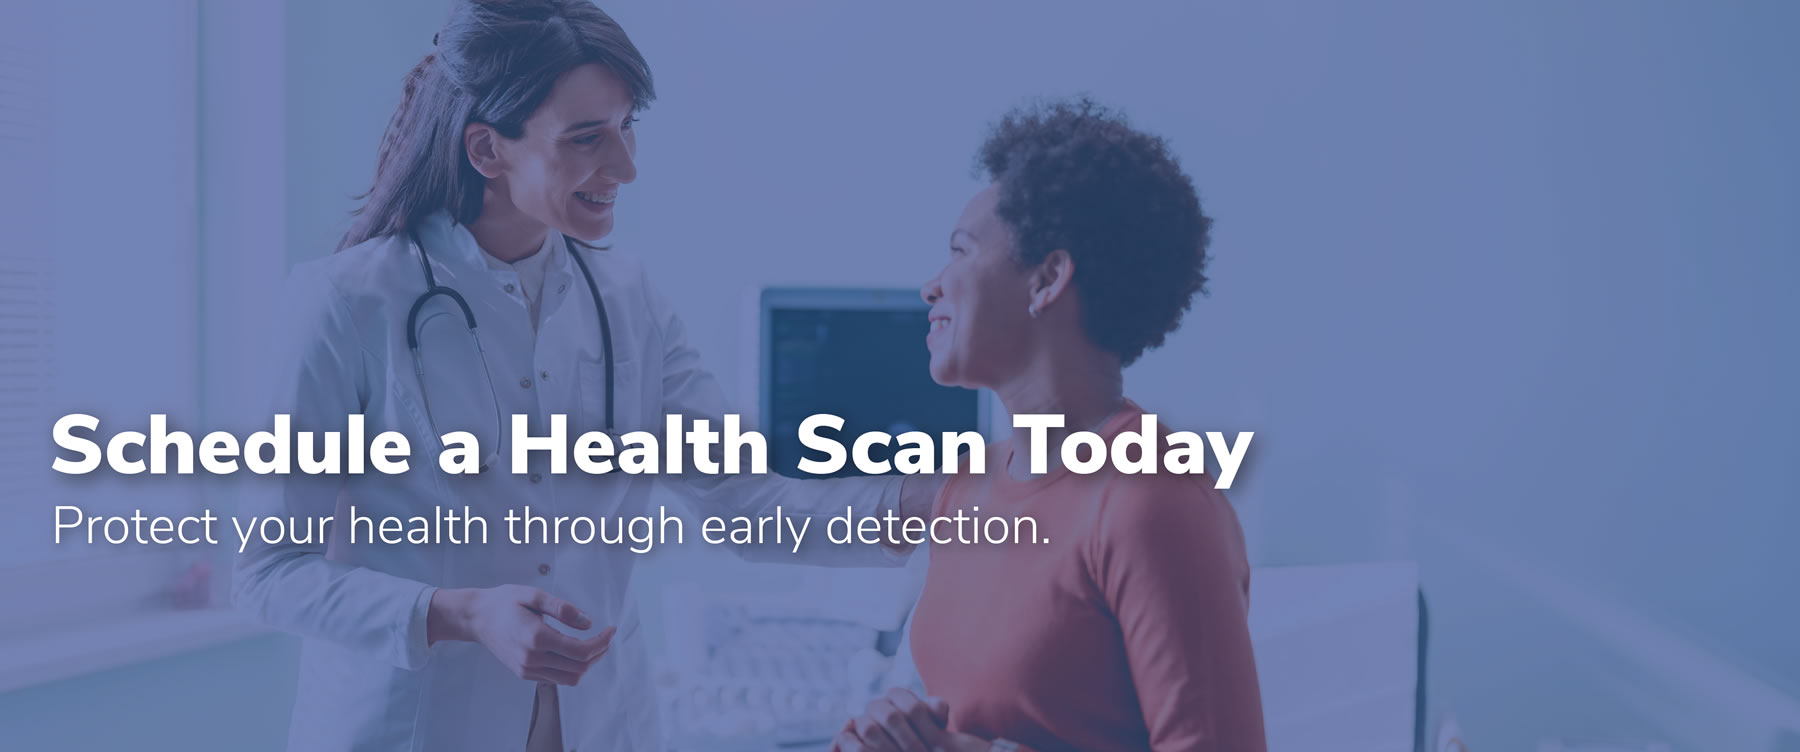 Schedule a Health Scan Today